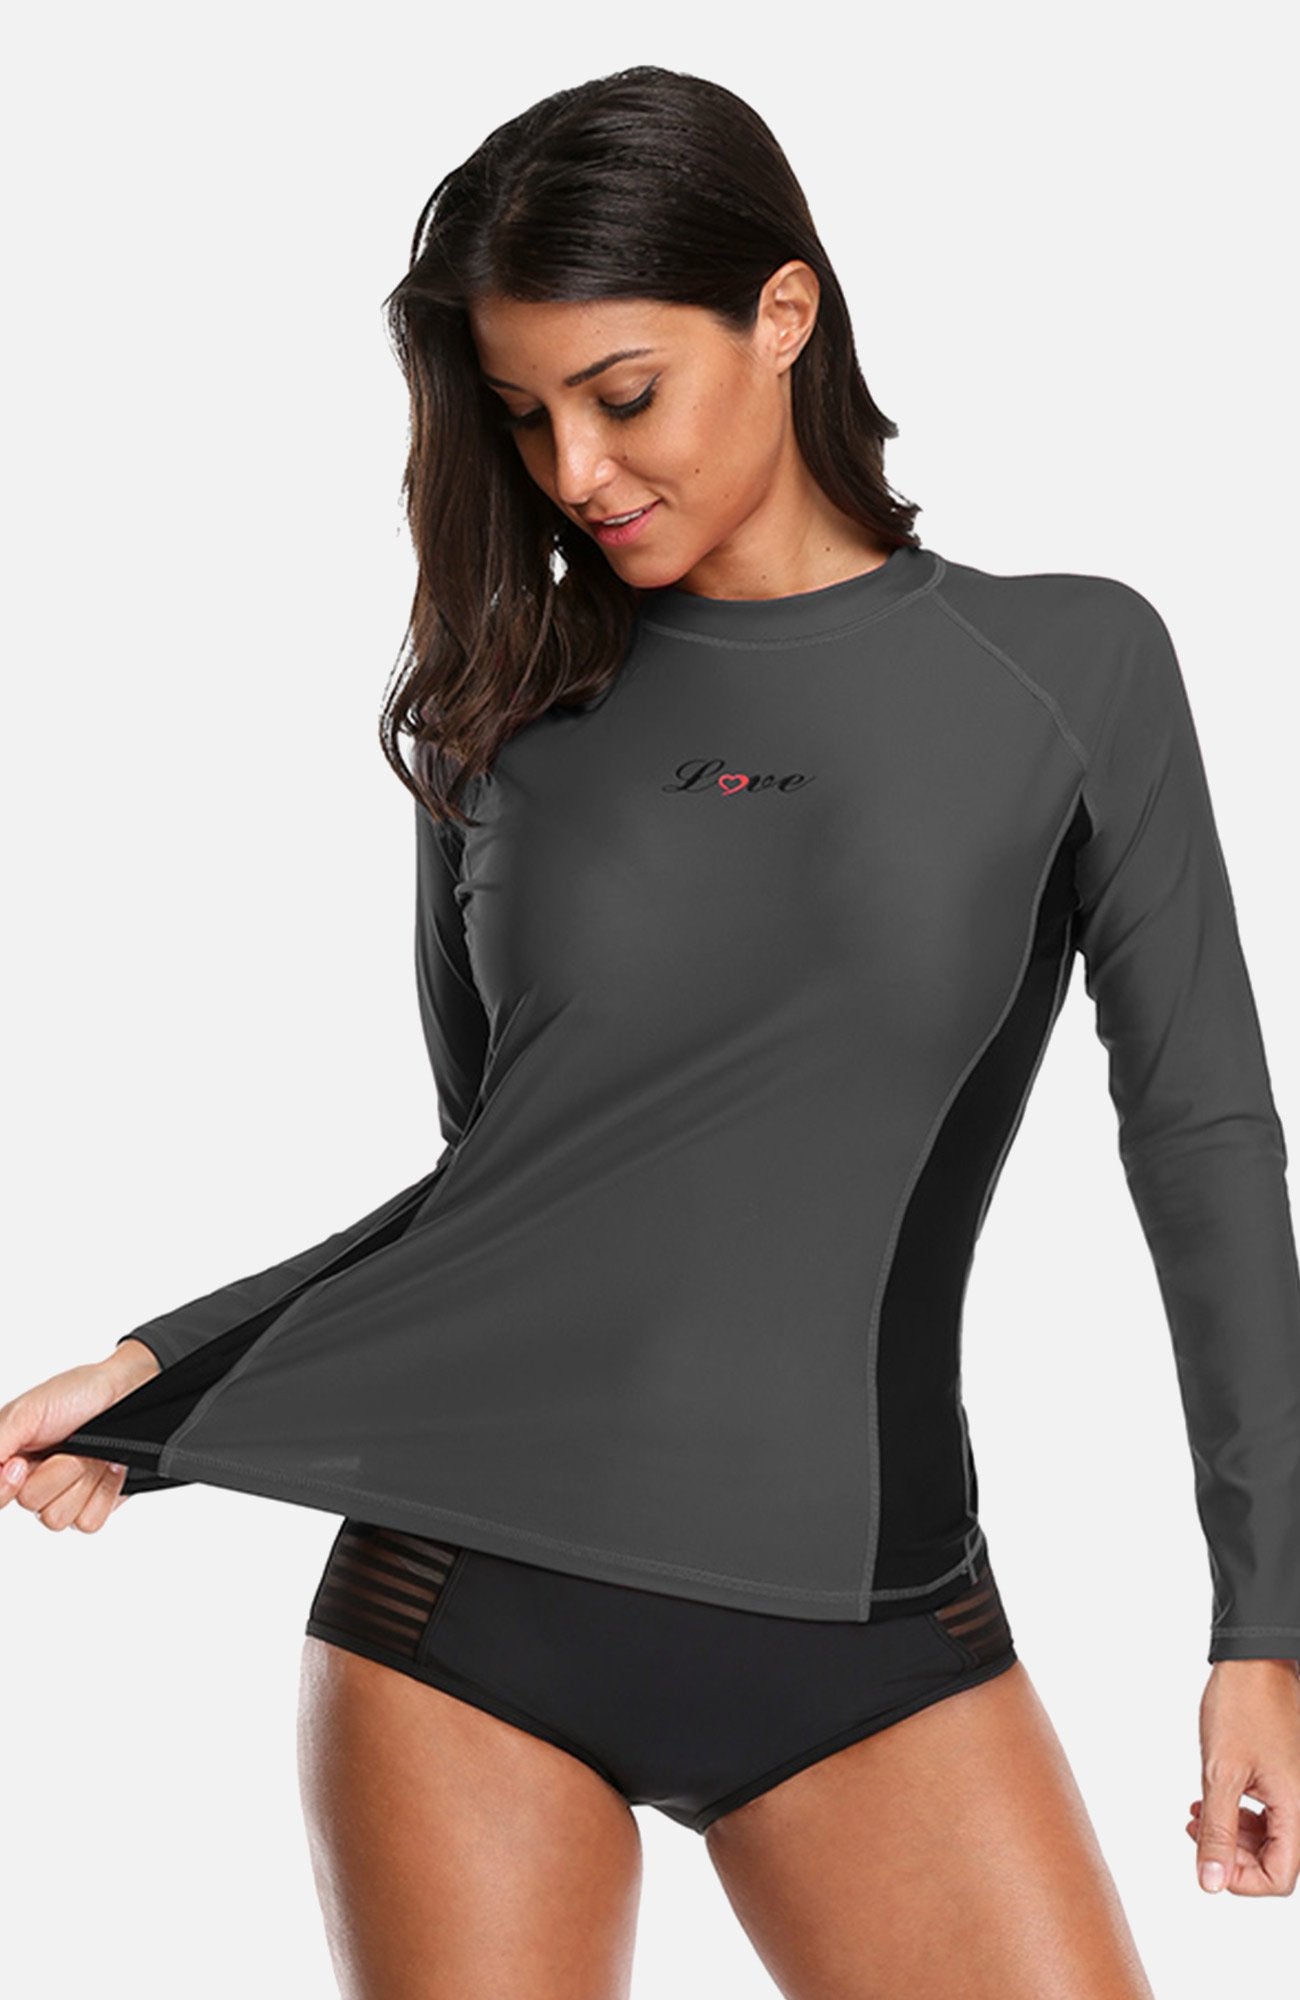 Clearance | Attraco Women's Long Sleeve Sport Fit UPF 50+ Rash Guard Gray-Attraco | Fashion Outdoor Clothing